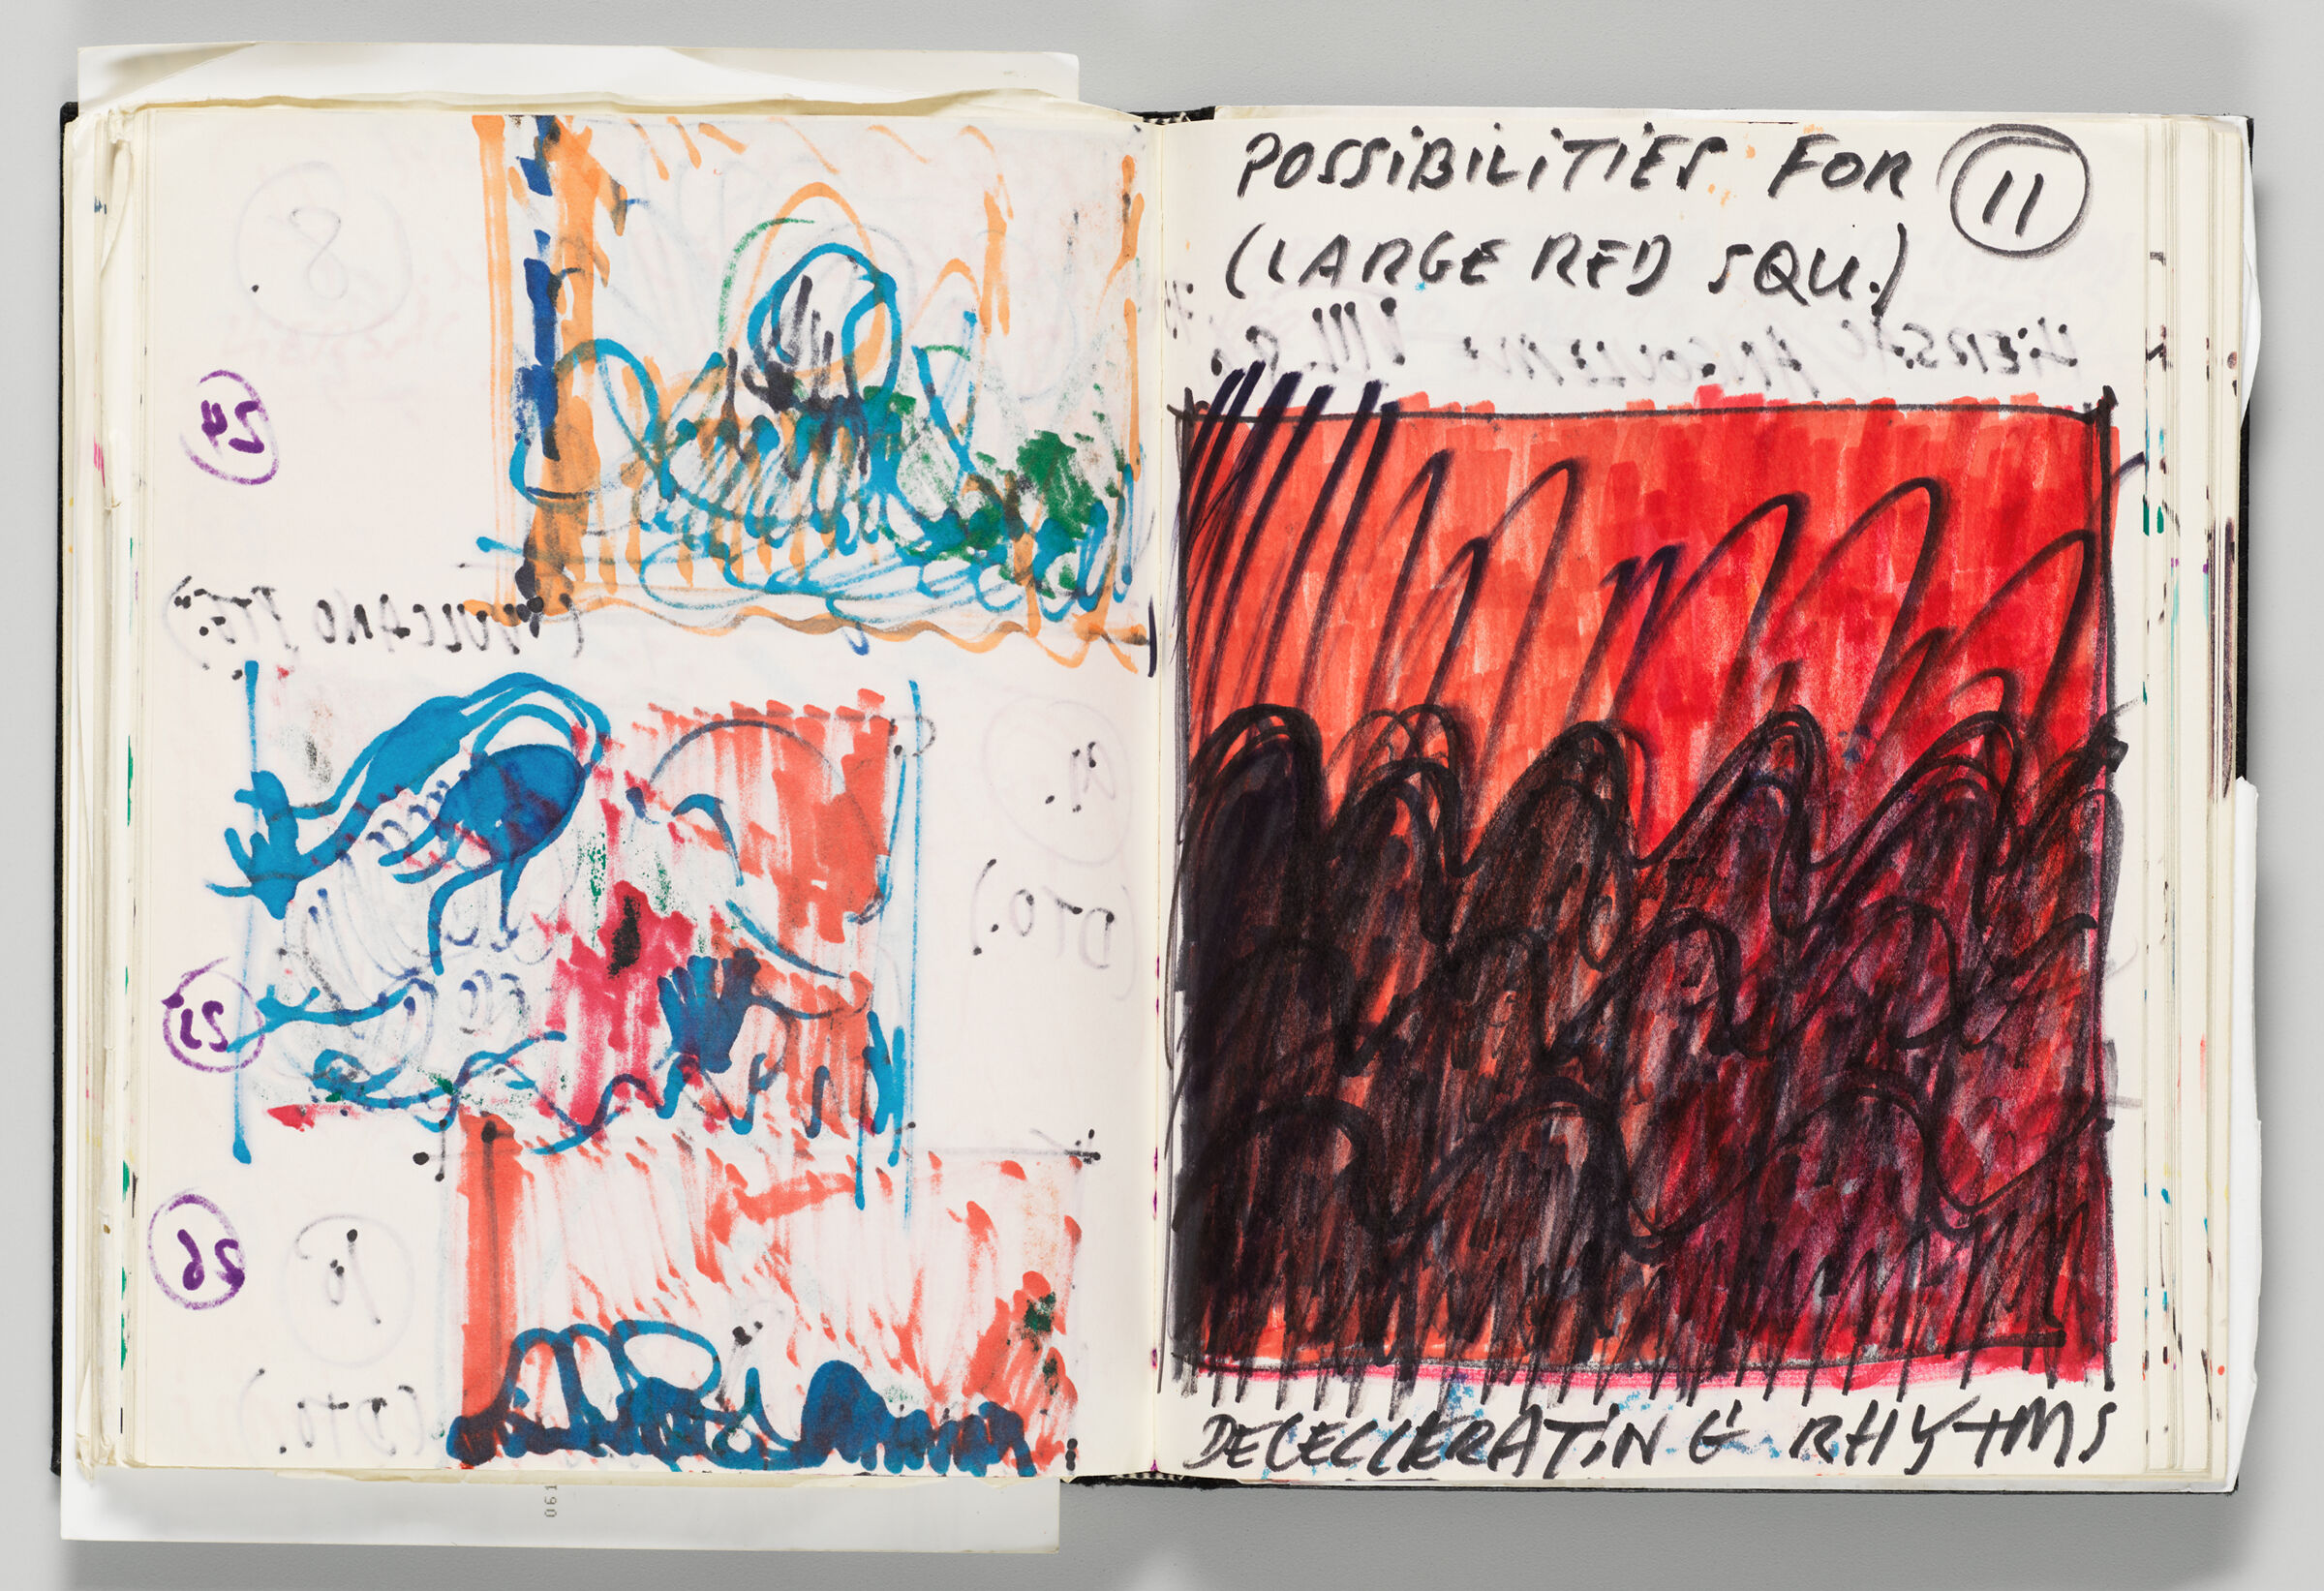 Untitled (Bleed-Through Of Previous Page And Color Transfer, Left Page); Untitled (Sketch And Note On Painting, Right Page)